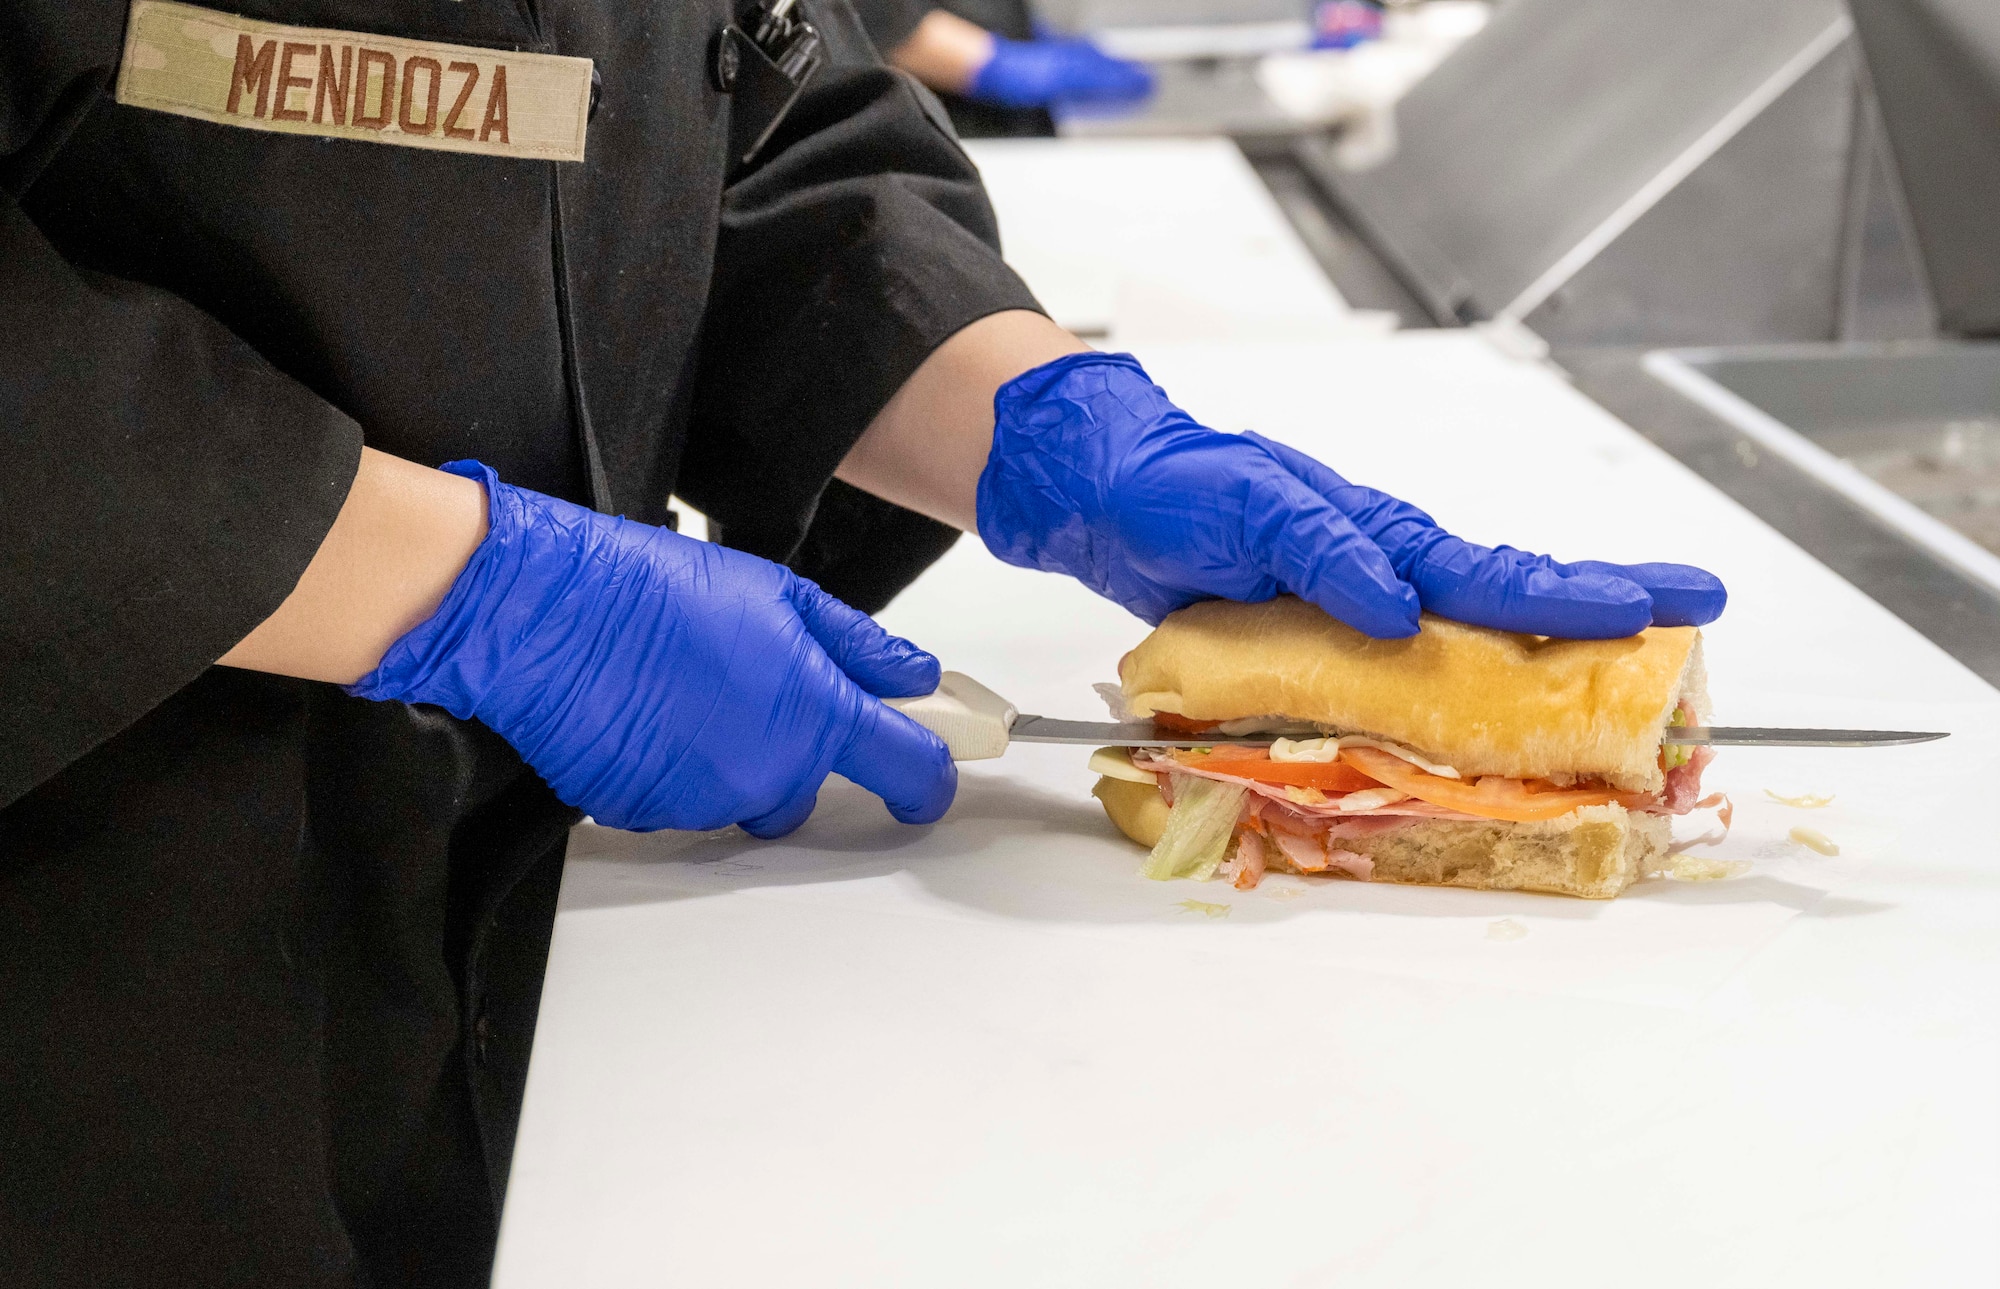 U.S. Air Force Airman Christina Mendoza, 49th Force Support Squadron food services journeyman, prepares a 49er Cafe sandwich during lunch at Holloman Air Force Base, New Mexico, March 27, 2024. The 49er Cafe recently unveiled a new menu featuring a selection of delectable breakfast and lunch items, along with coffee drinks for base personnel. (U.S. Air Force photo by Airman 1st Class Michelle Ferrari)